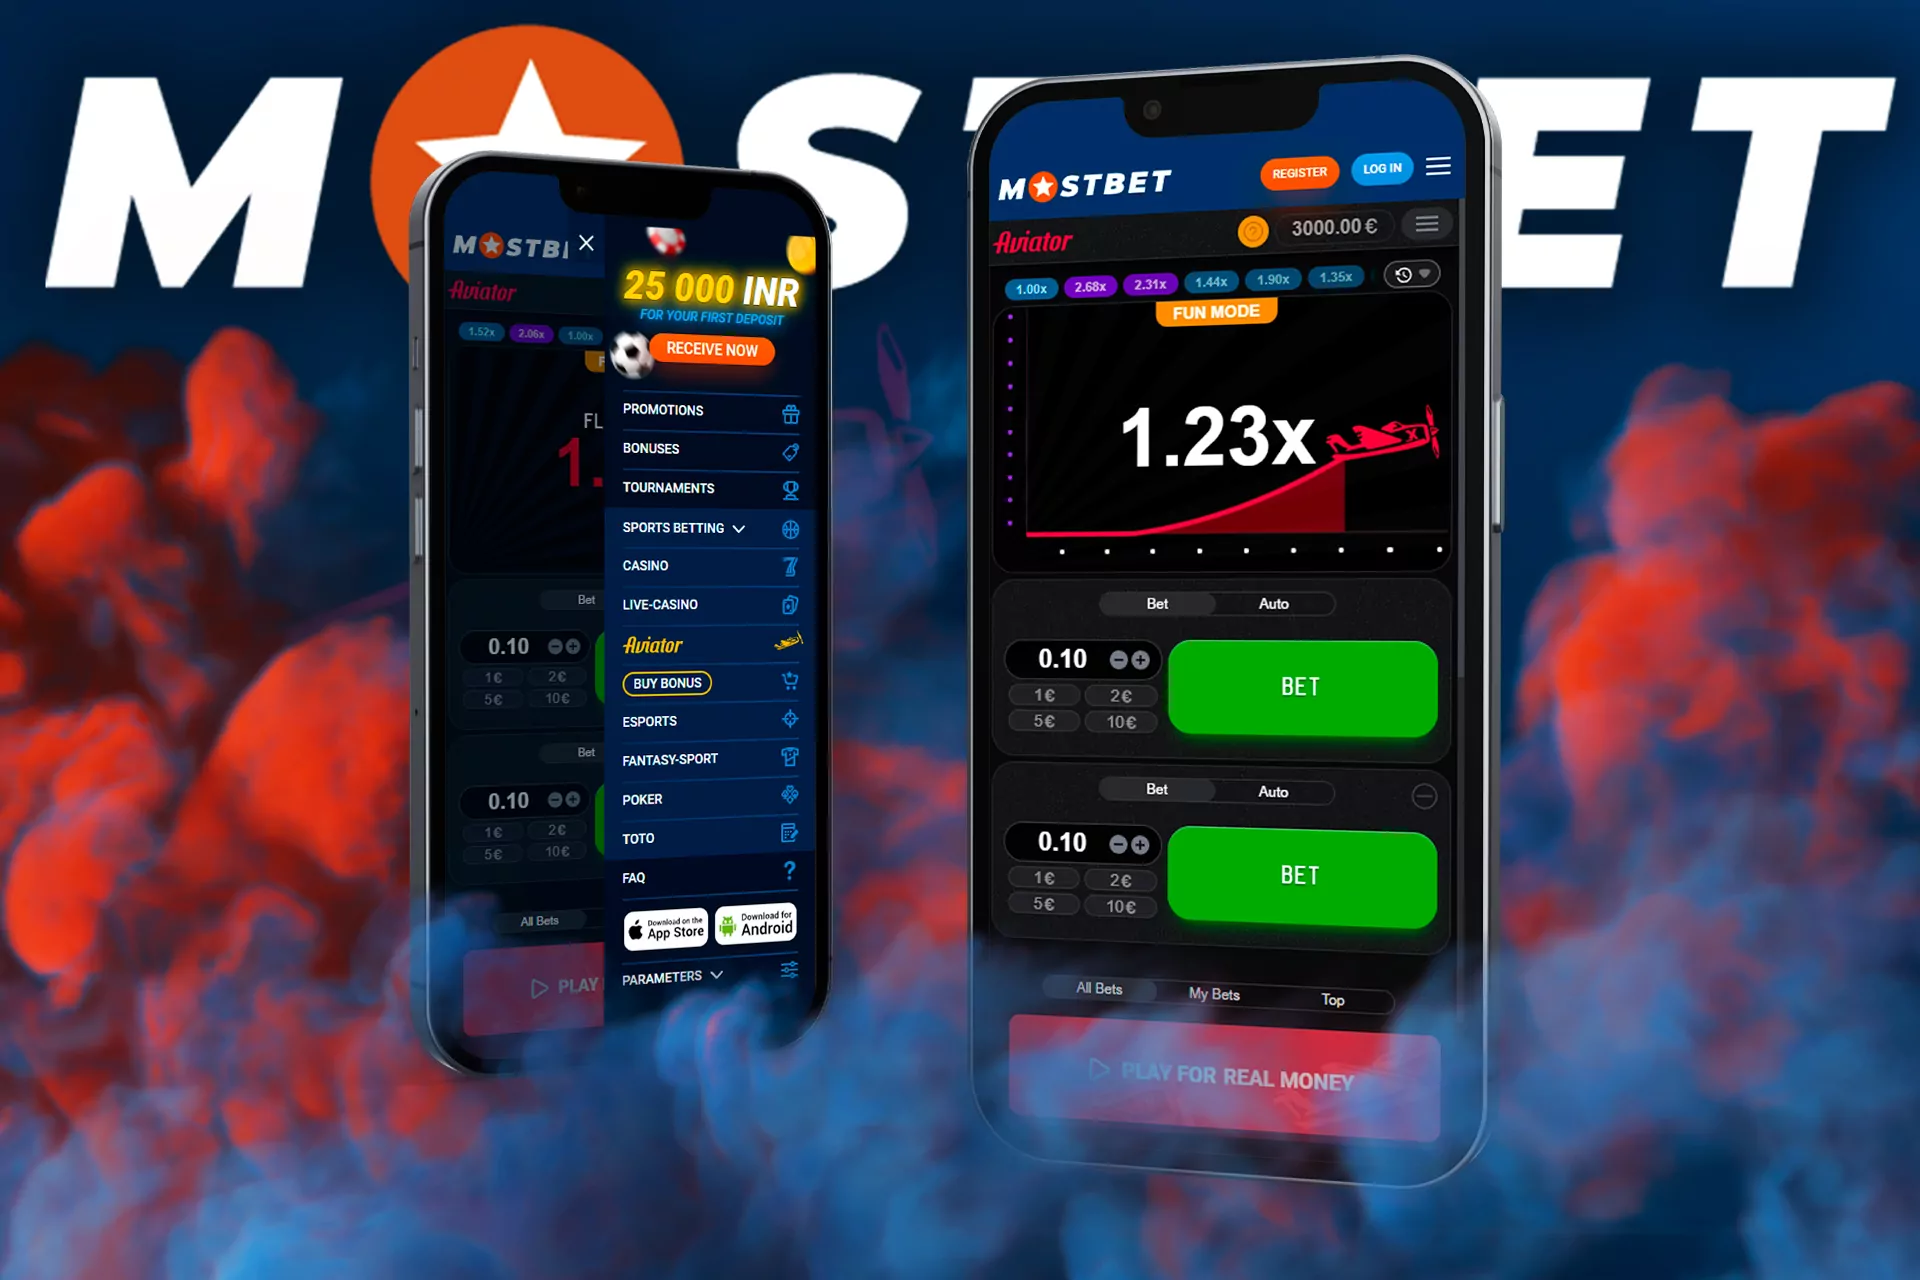 To bet in the Mostbet Aviator from a smartphone, install the app.